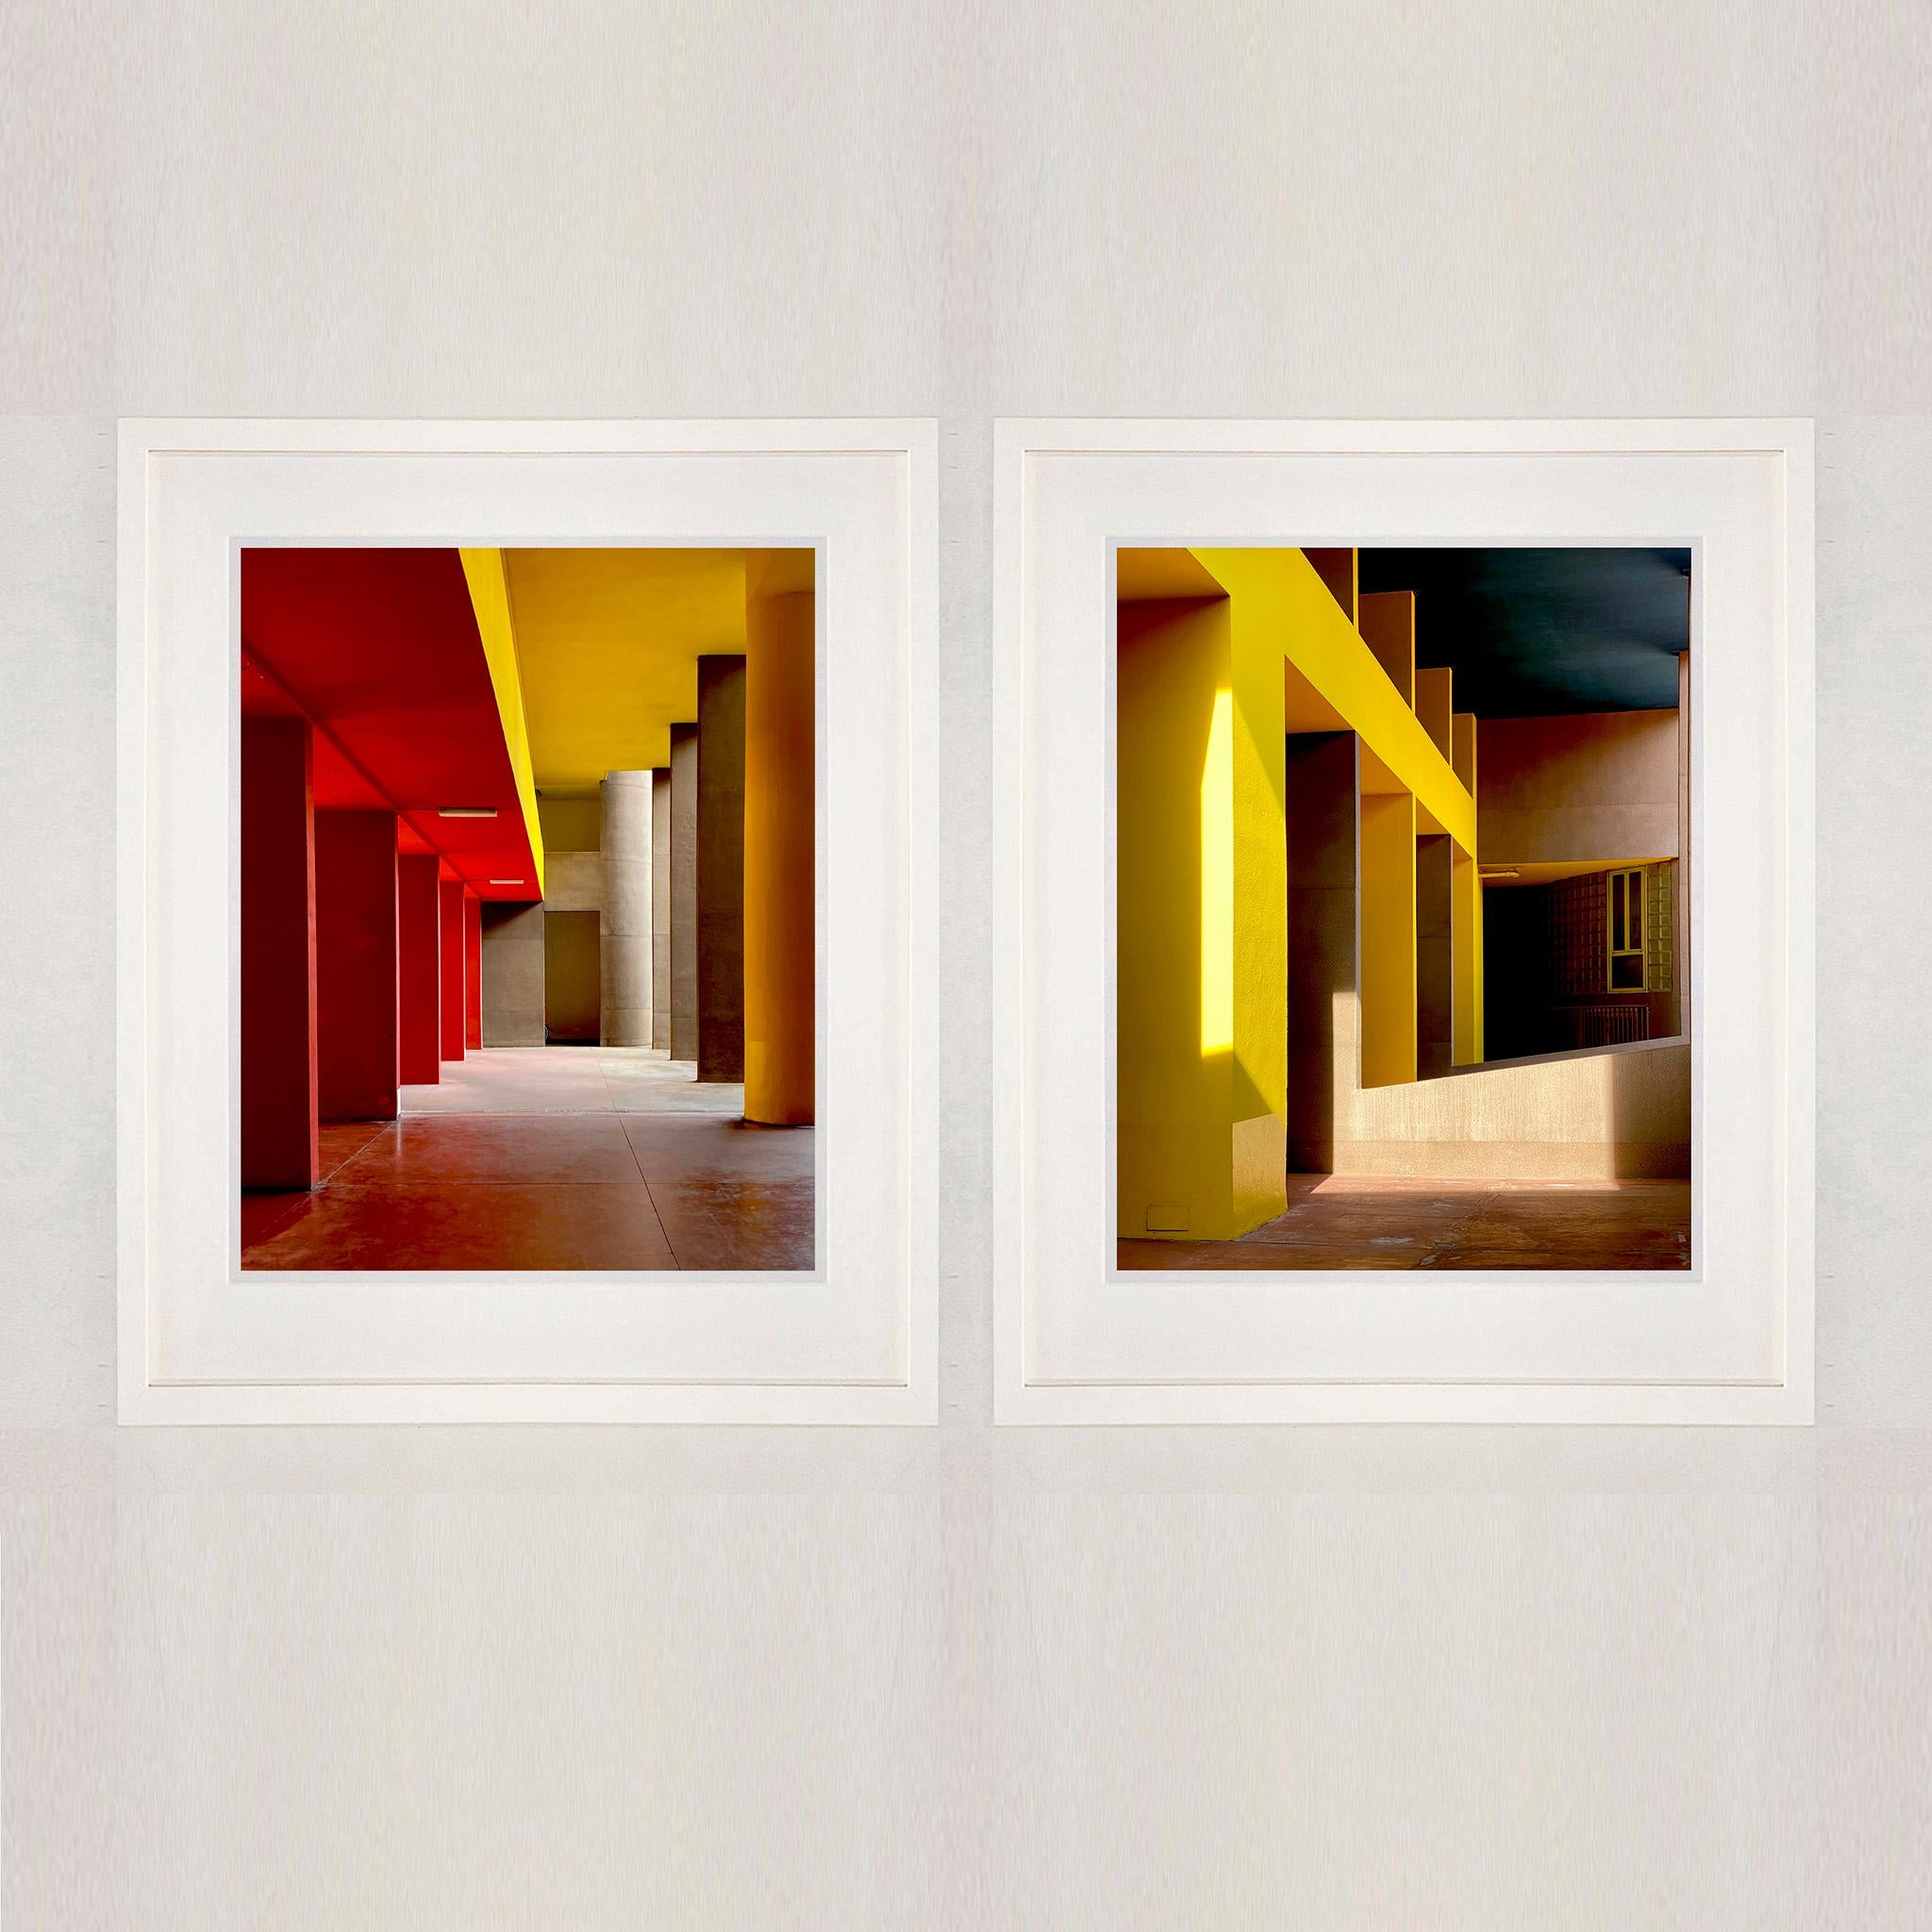 Monte Amiata I and Utopian Foyer IV, Milan - Two Framed Architecture Photographs - Print by Richard Heeps